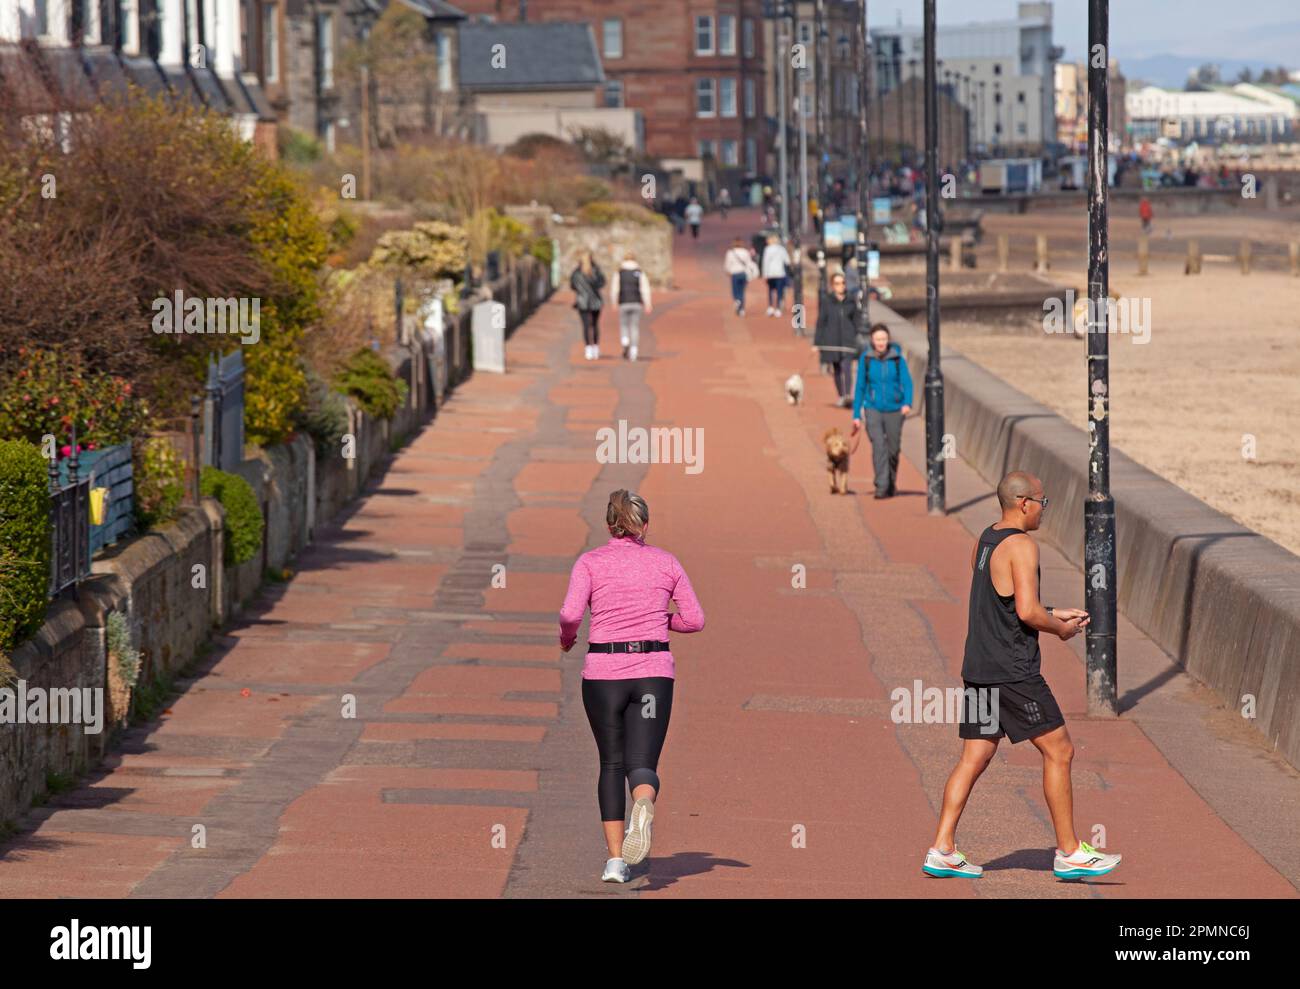 Portobello, Edinburgh, Scotland, UK. 14th April 2023. Morning exercise by the Firth of Forth. Pictured: Peole walking a exercising on the promenade by the Firth of Forth,, temperature 10 degrees centigrade. Credit: Scottishcreative/alamy live news. Stock Photo